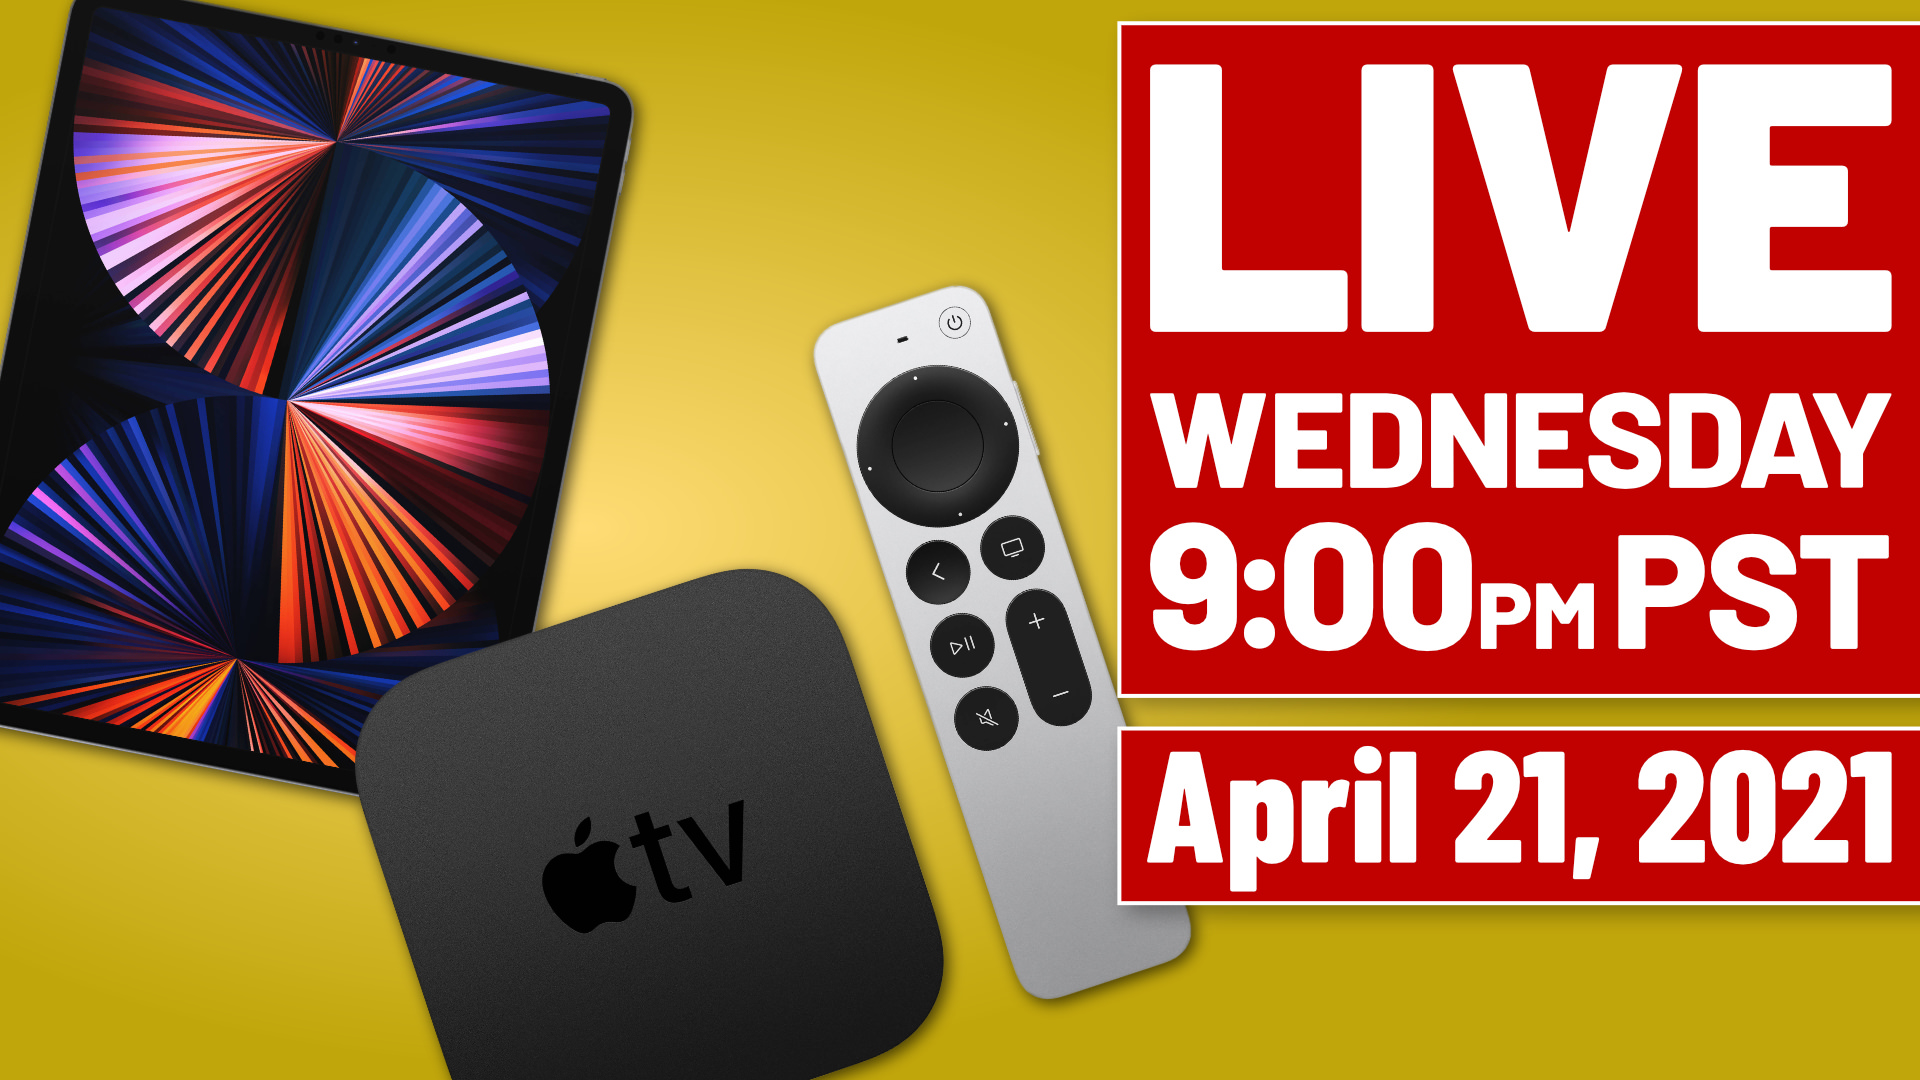 Let S Talk Apple Tv 4k And Ipad Pro Xdr… Live Replay